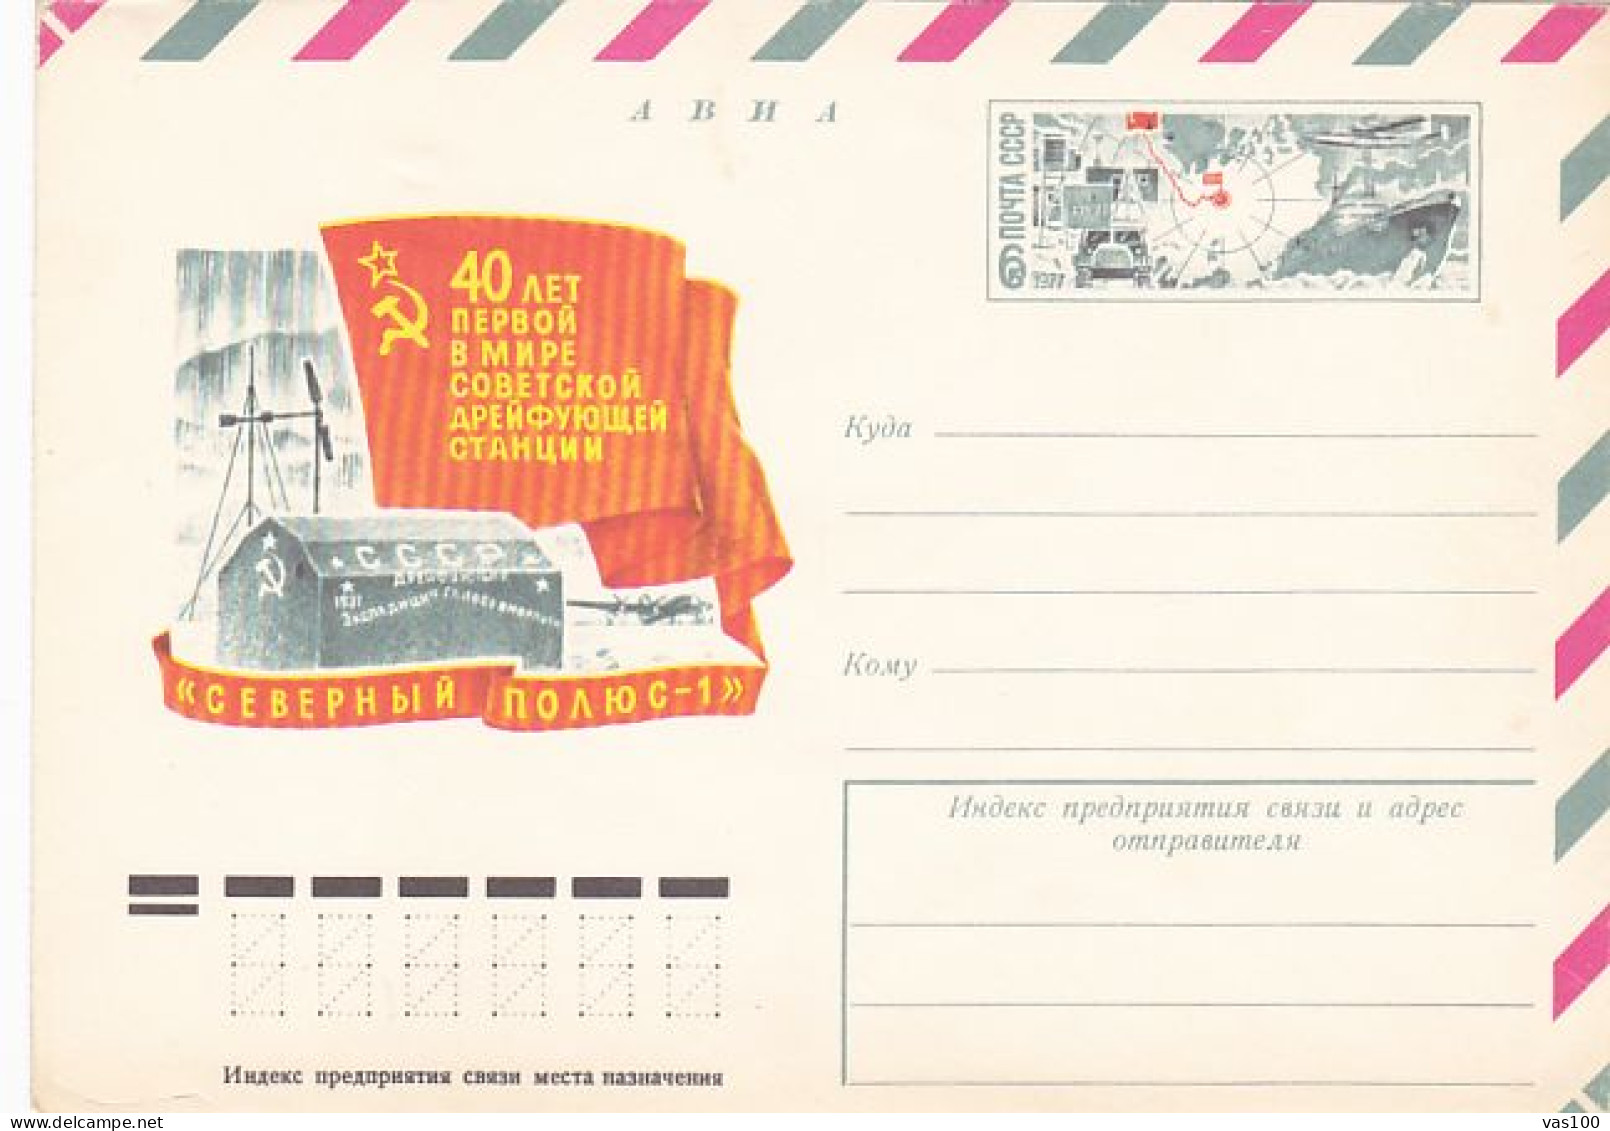 NORTH POLE, RUSSIAN NORTH POLE 1 REASERCH STATION, COVER STATIONERY, ENTIER POSTAL, 1977, RUSSIA - Wetenschappelijke Stations & Arctic Drifting Stations